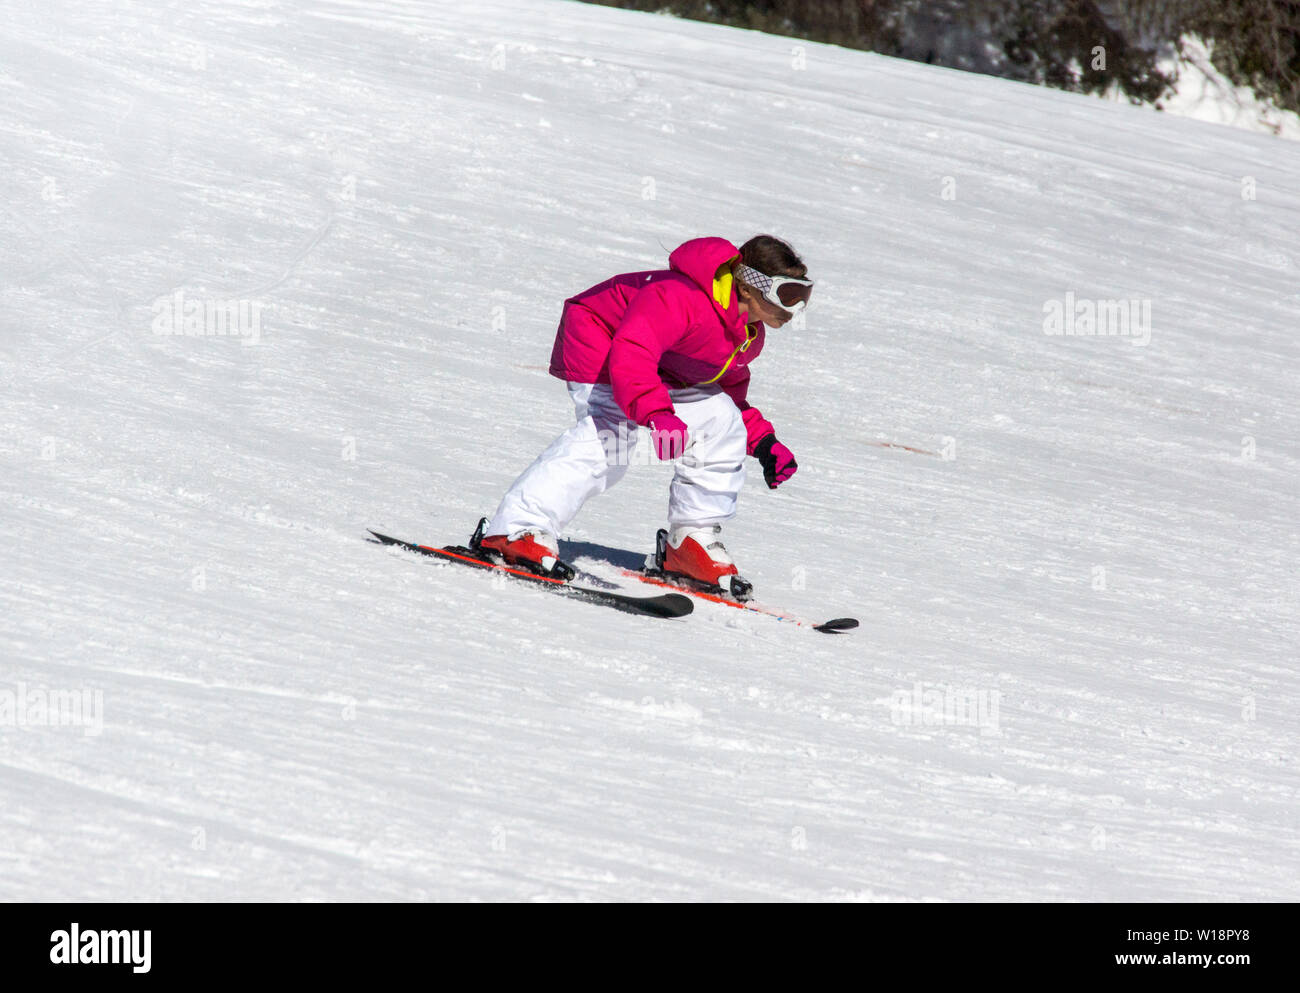 The central Pyrenees at Pont Espagne. Young boy learning to ski on the beginners slope.No sticks. Stock Photo